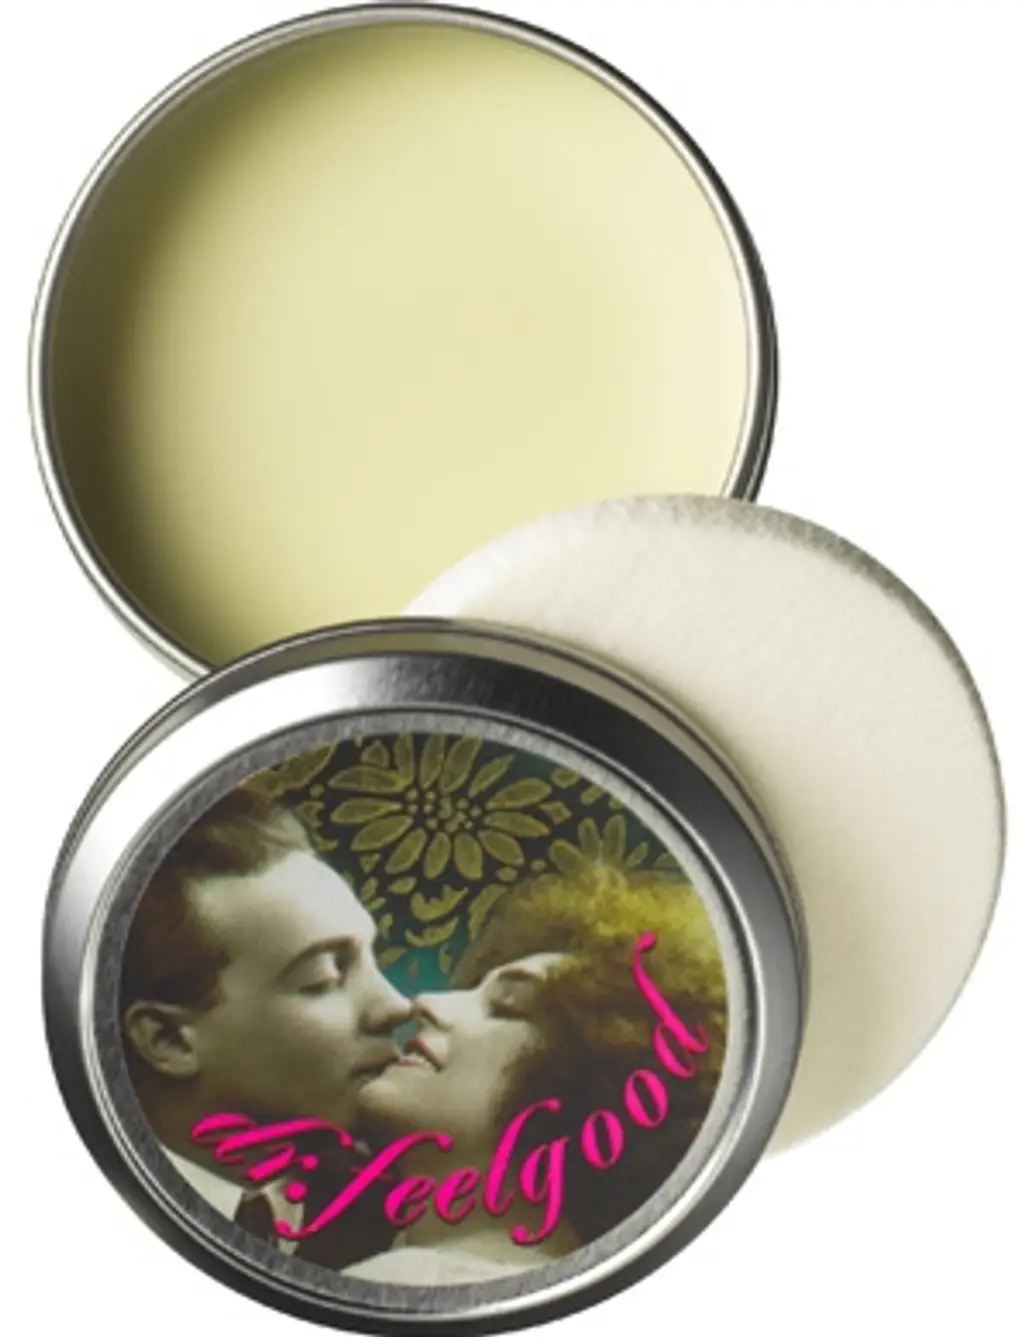 Dr. Feelgood Face Balm by Benefit